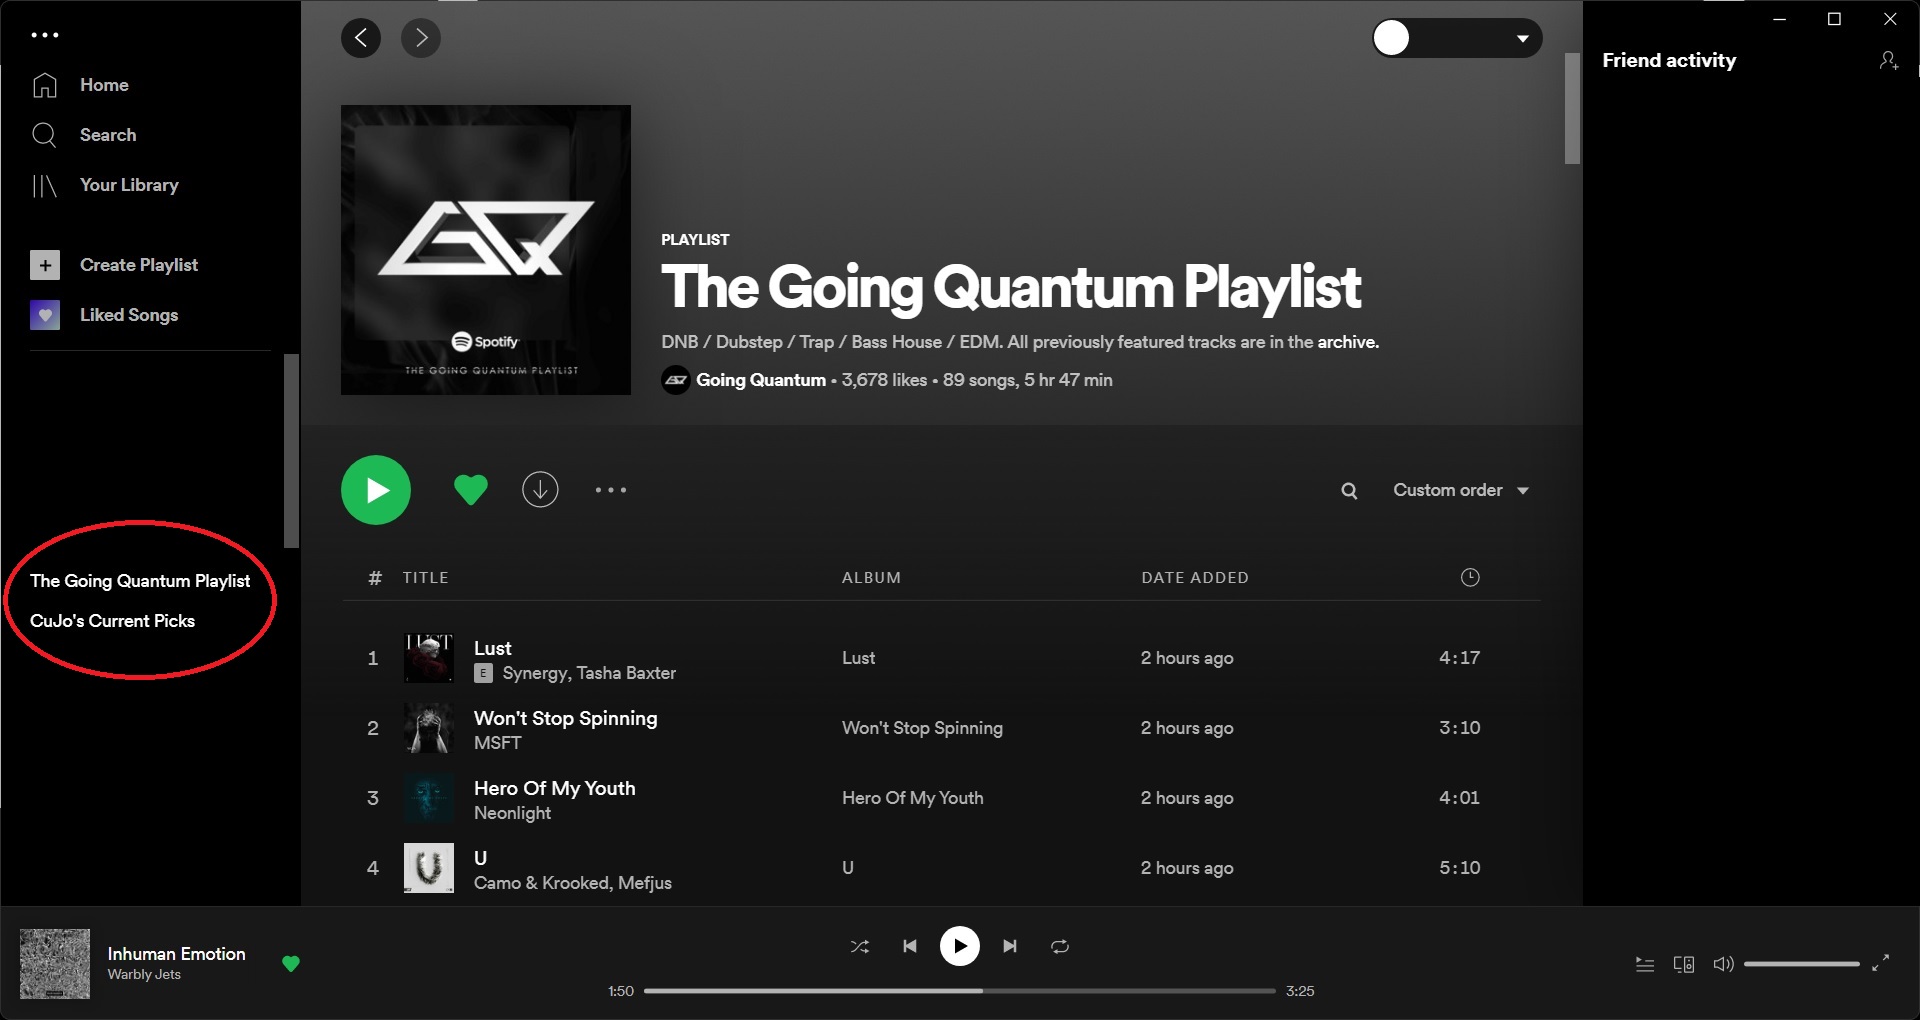 Location of playlists in the Spotify interface